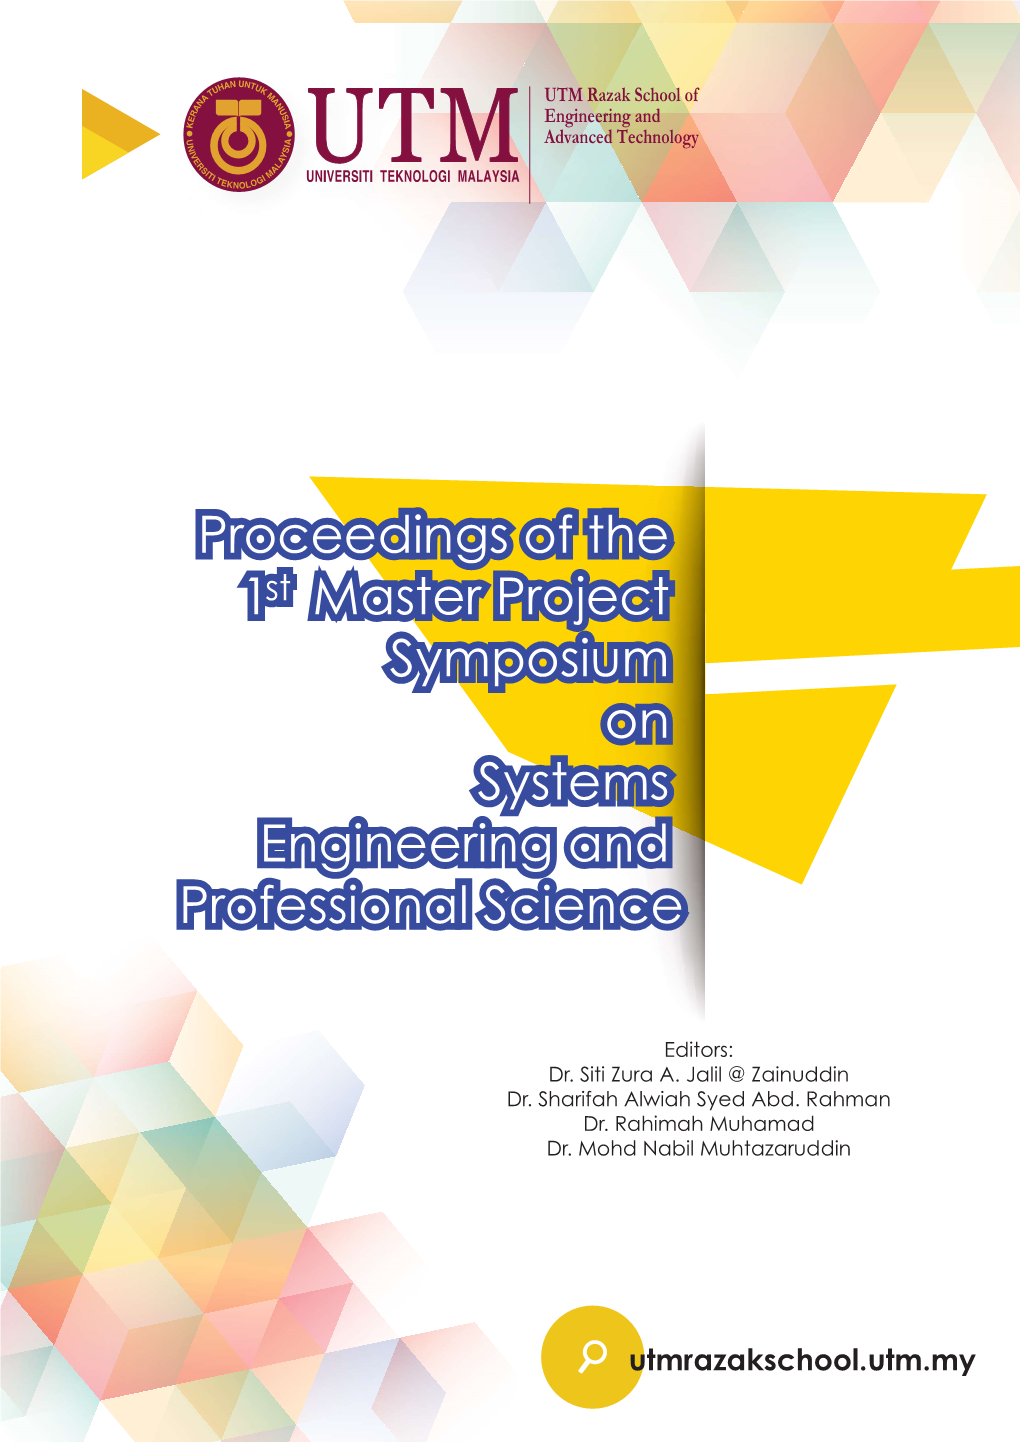 PROCEEDINGS of the 1St MASTER PROJECT SYMPOSIUM on SYSTEMS ENGINEERING and PROFESSIONAL SCIENCE